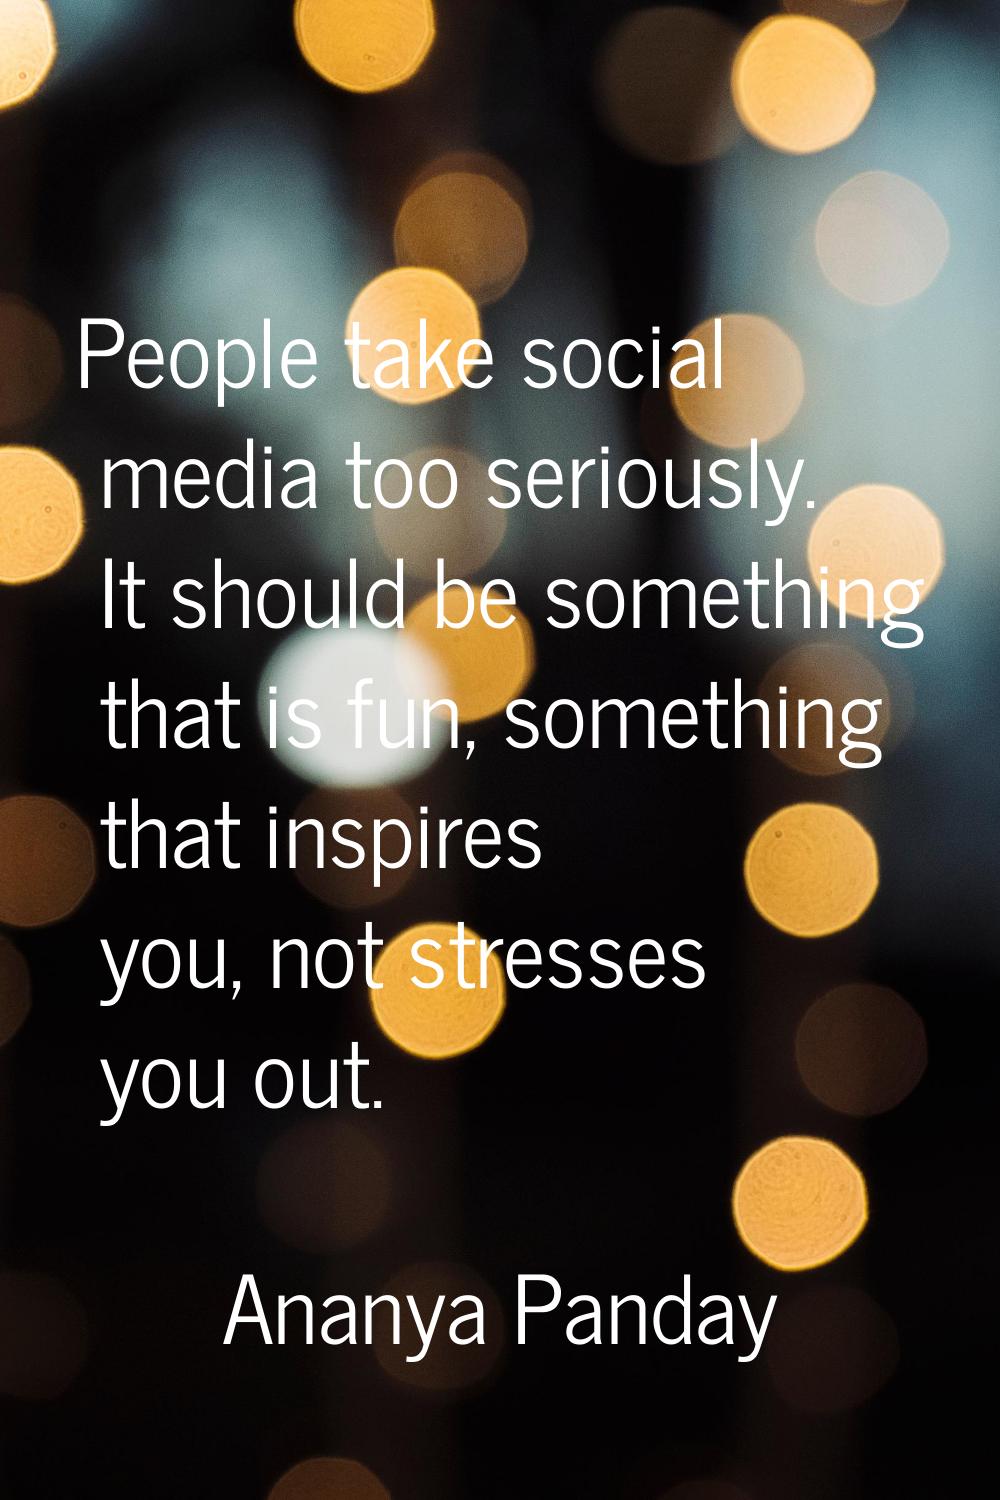 People take social media too seriously. It should be something that is fun, something that inspires